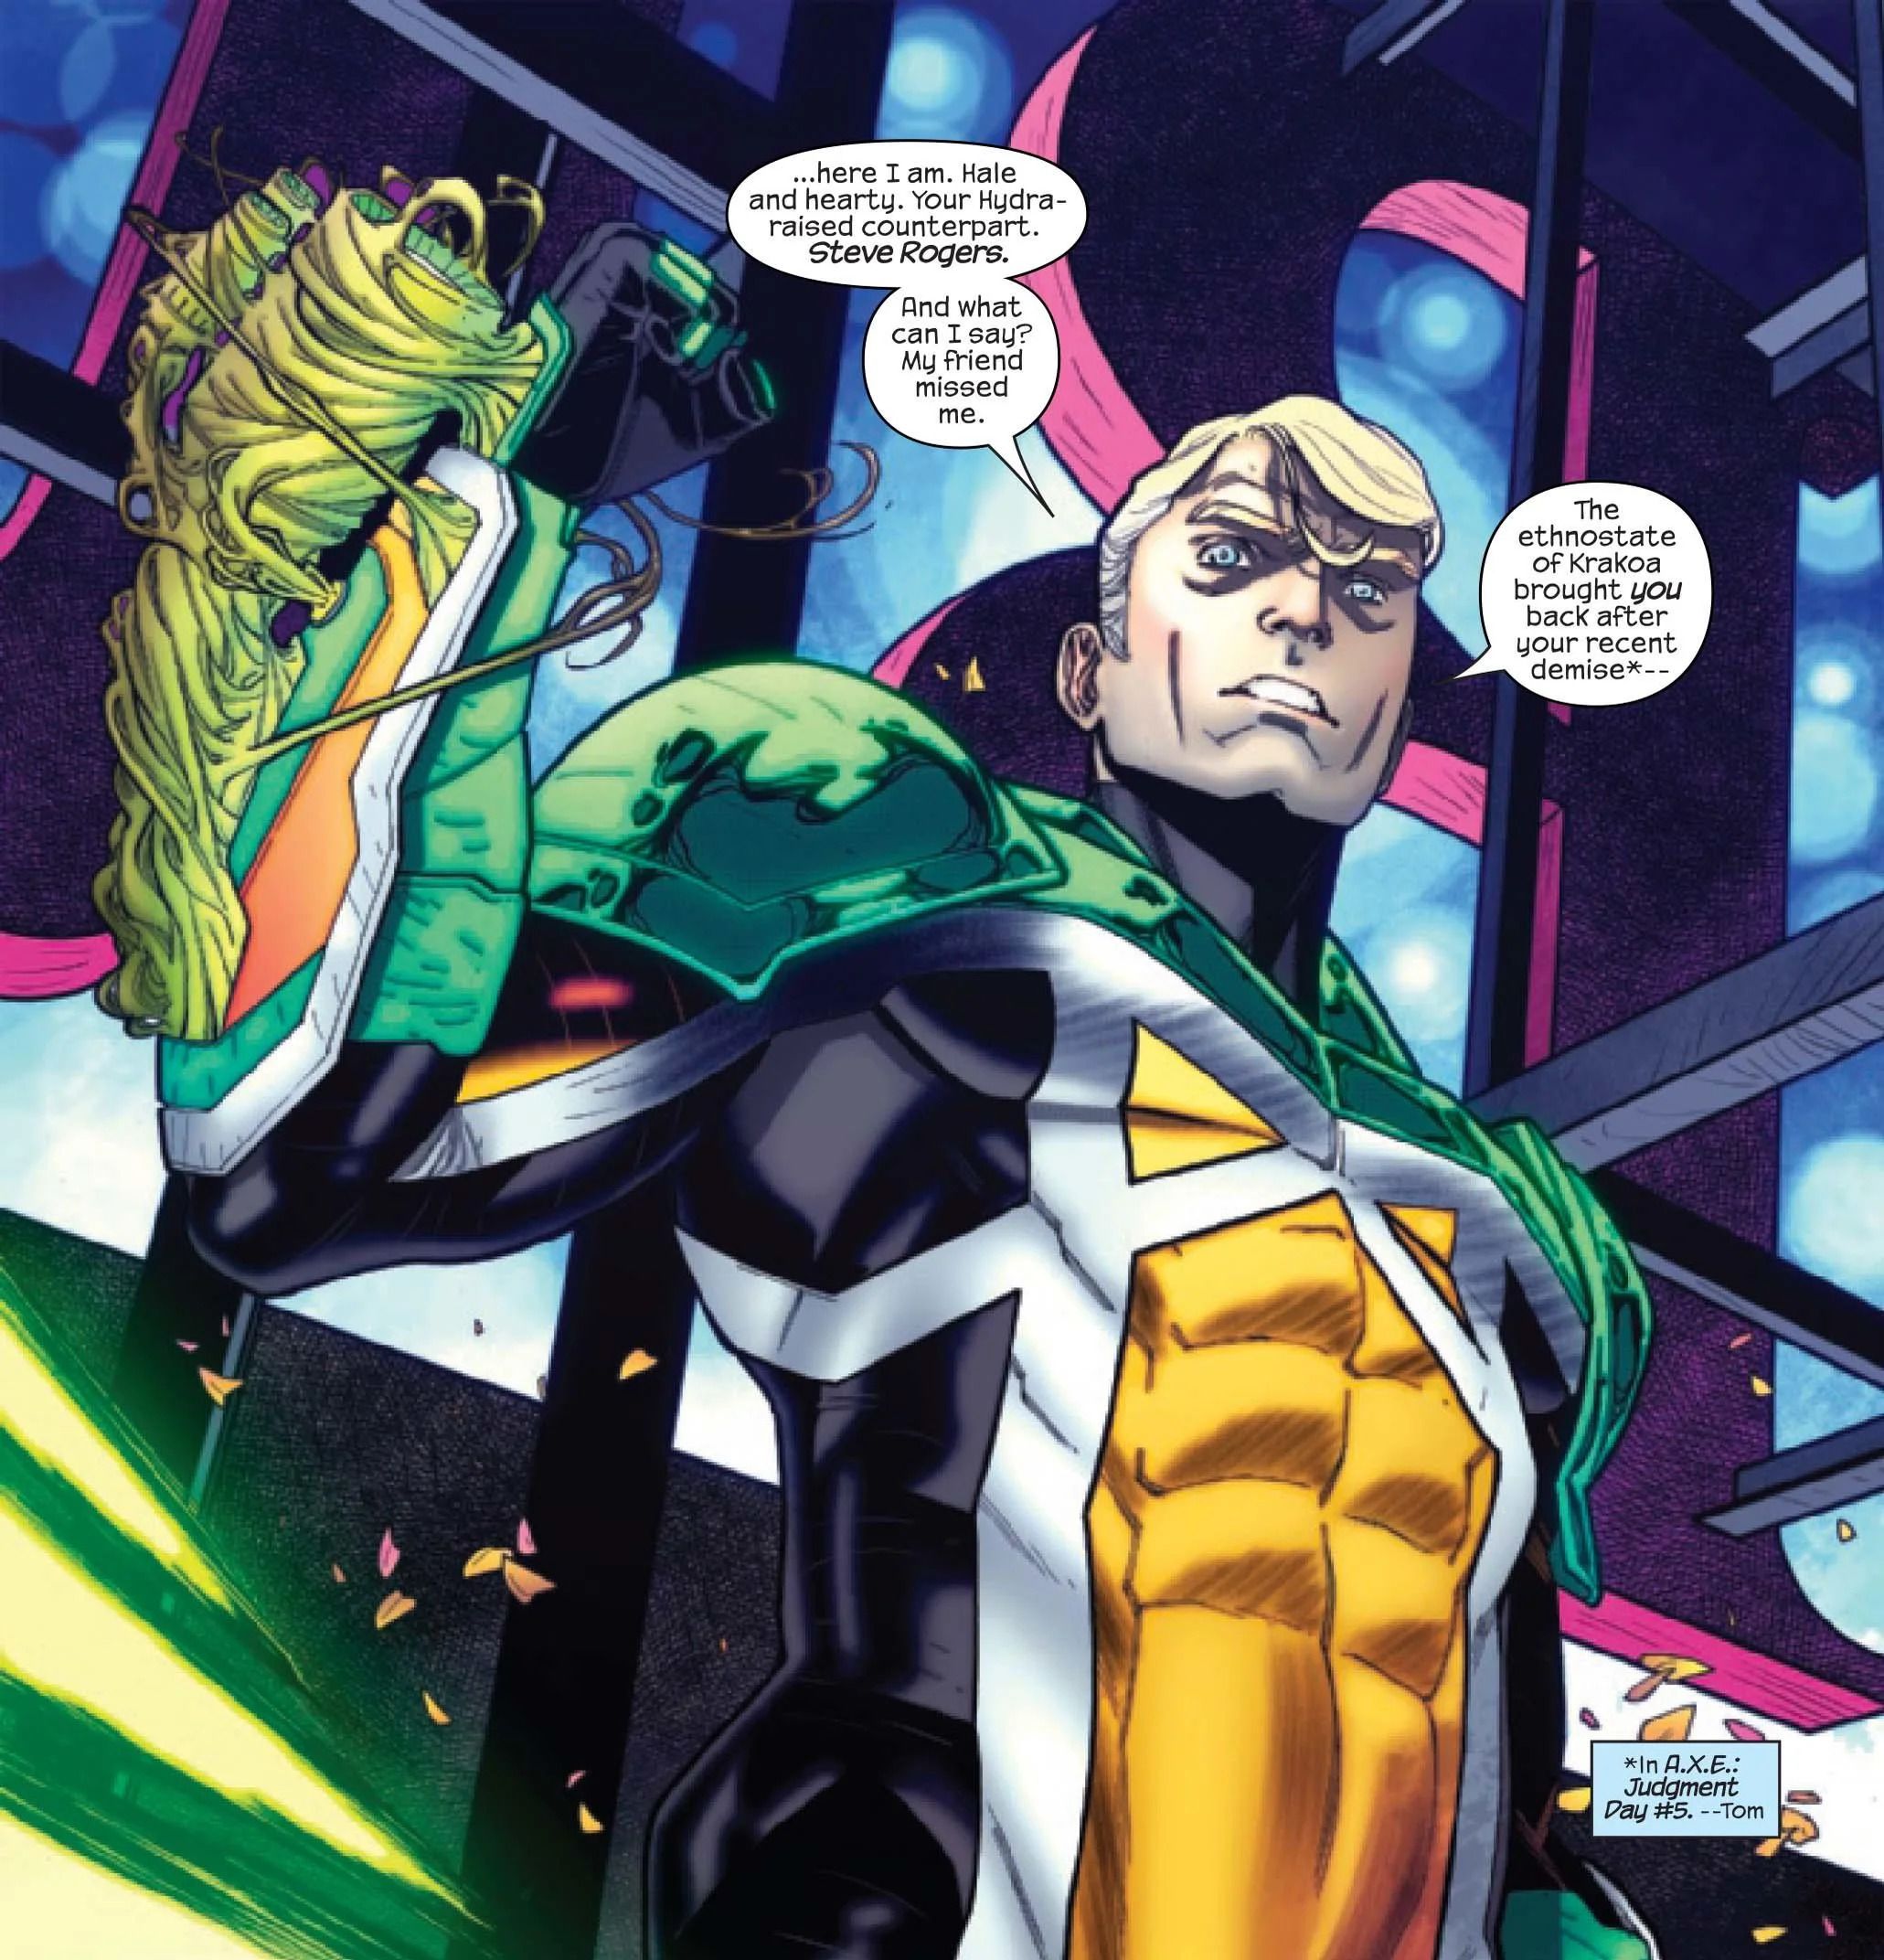 Marvel Reveals Captain Krakoa’s True Identity (As One of Its Most Controversial Villains Ever)